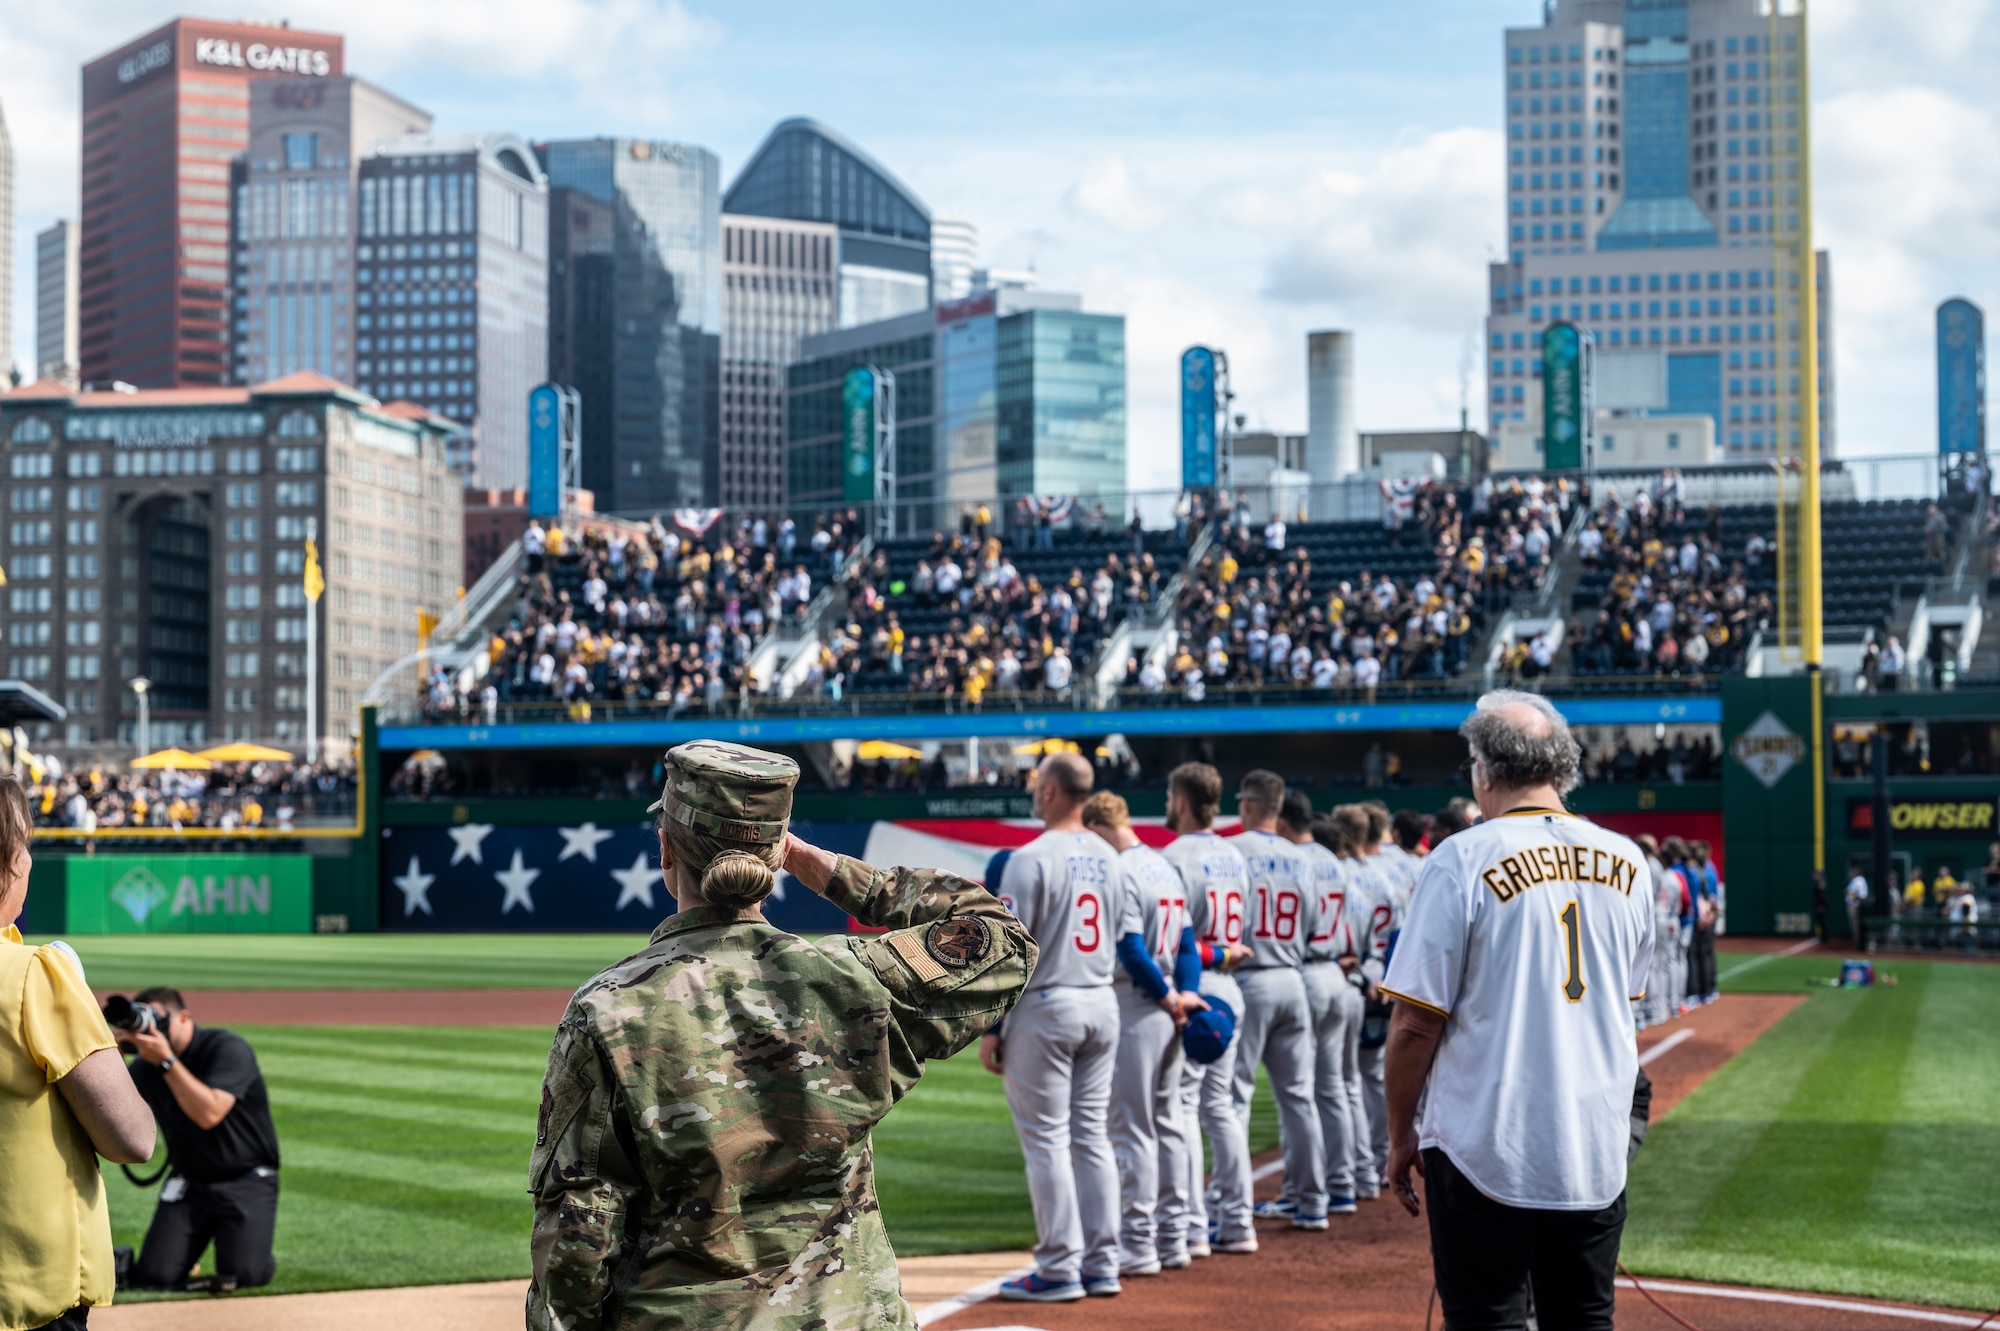 Tech. Sgt. Vanessa Norris, a readiness NCO assigned to the 911th Airman and Family Readiness Center renders a salute during the singing of the National Anthem before the Pittsburgh Pirates home opener at PNC Park in Pittsburgh, Pennsylvania, April 12, 2022.